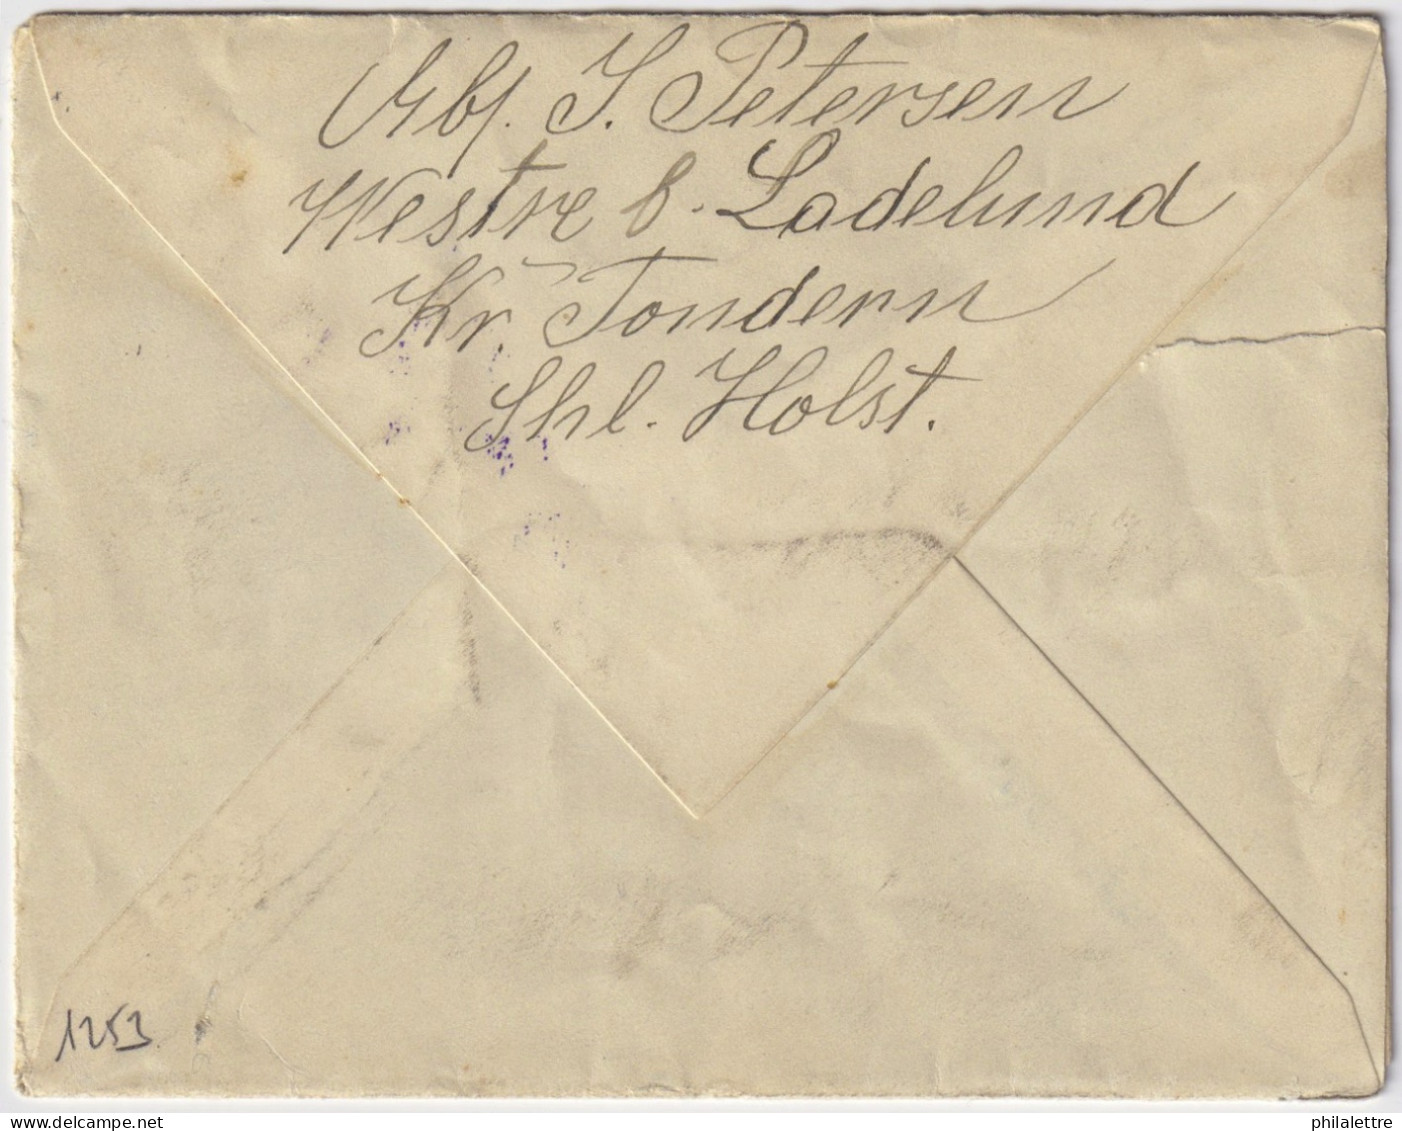 ALLEMAGNE / GERMANY - 1917 Feldpost Letter From LECK To A Soldier - Returned To Sender "ZURÜCK, GEFALLEN" (deceased) - Covers & Documents